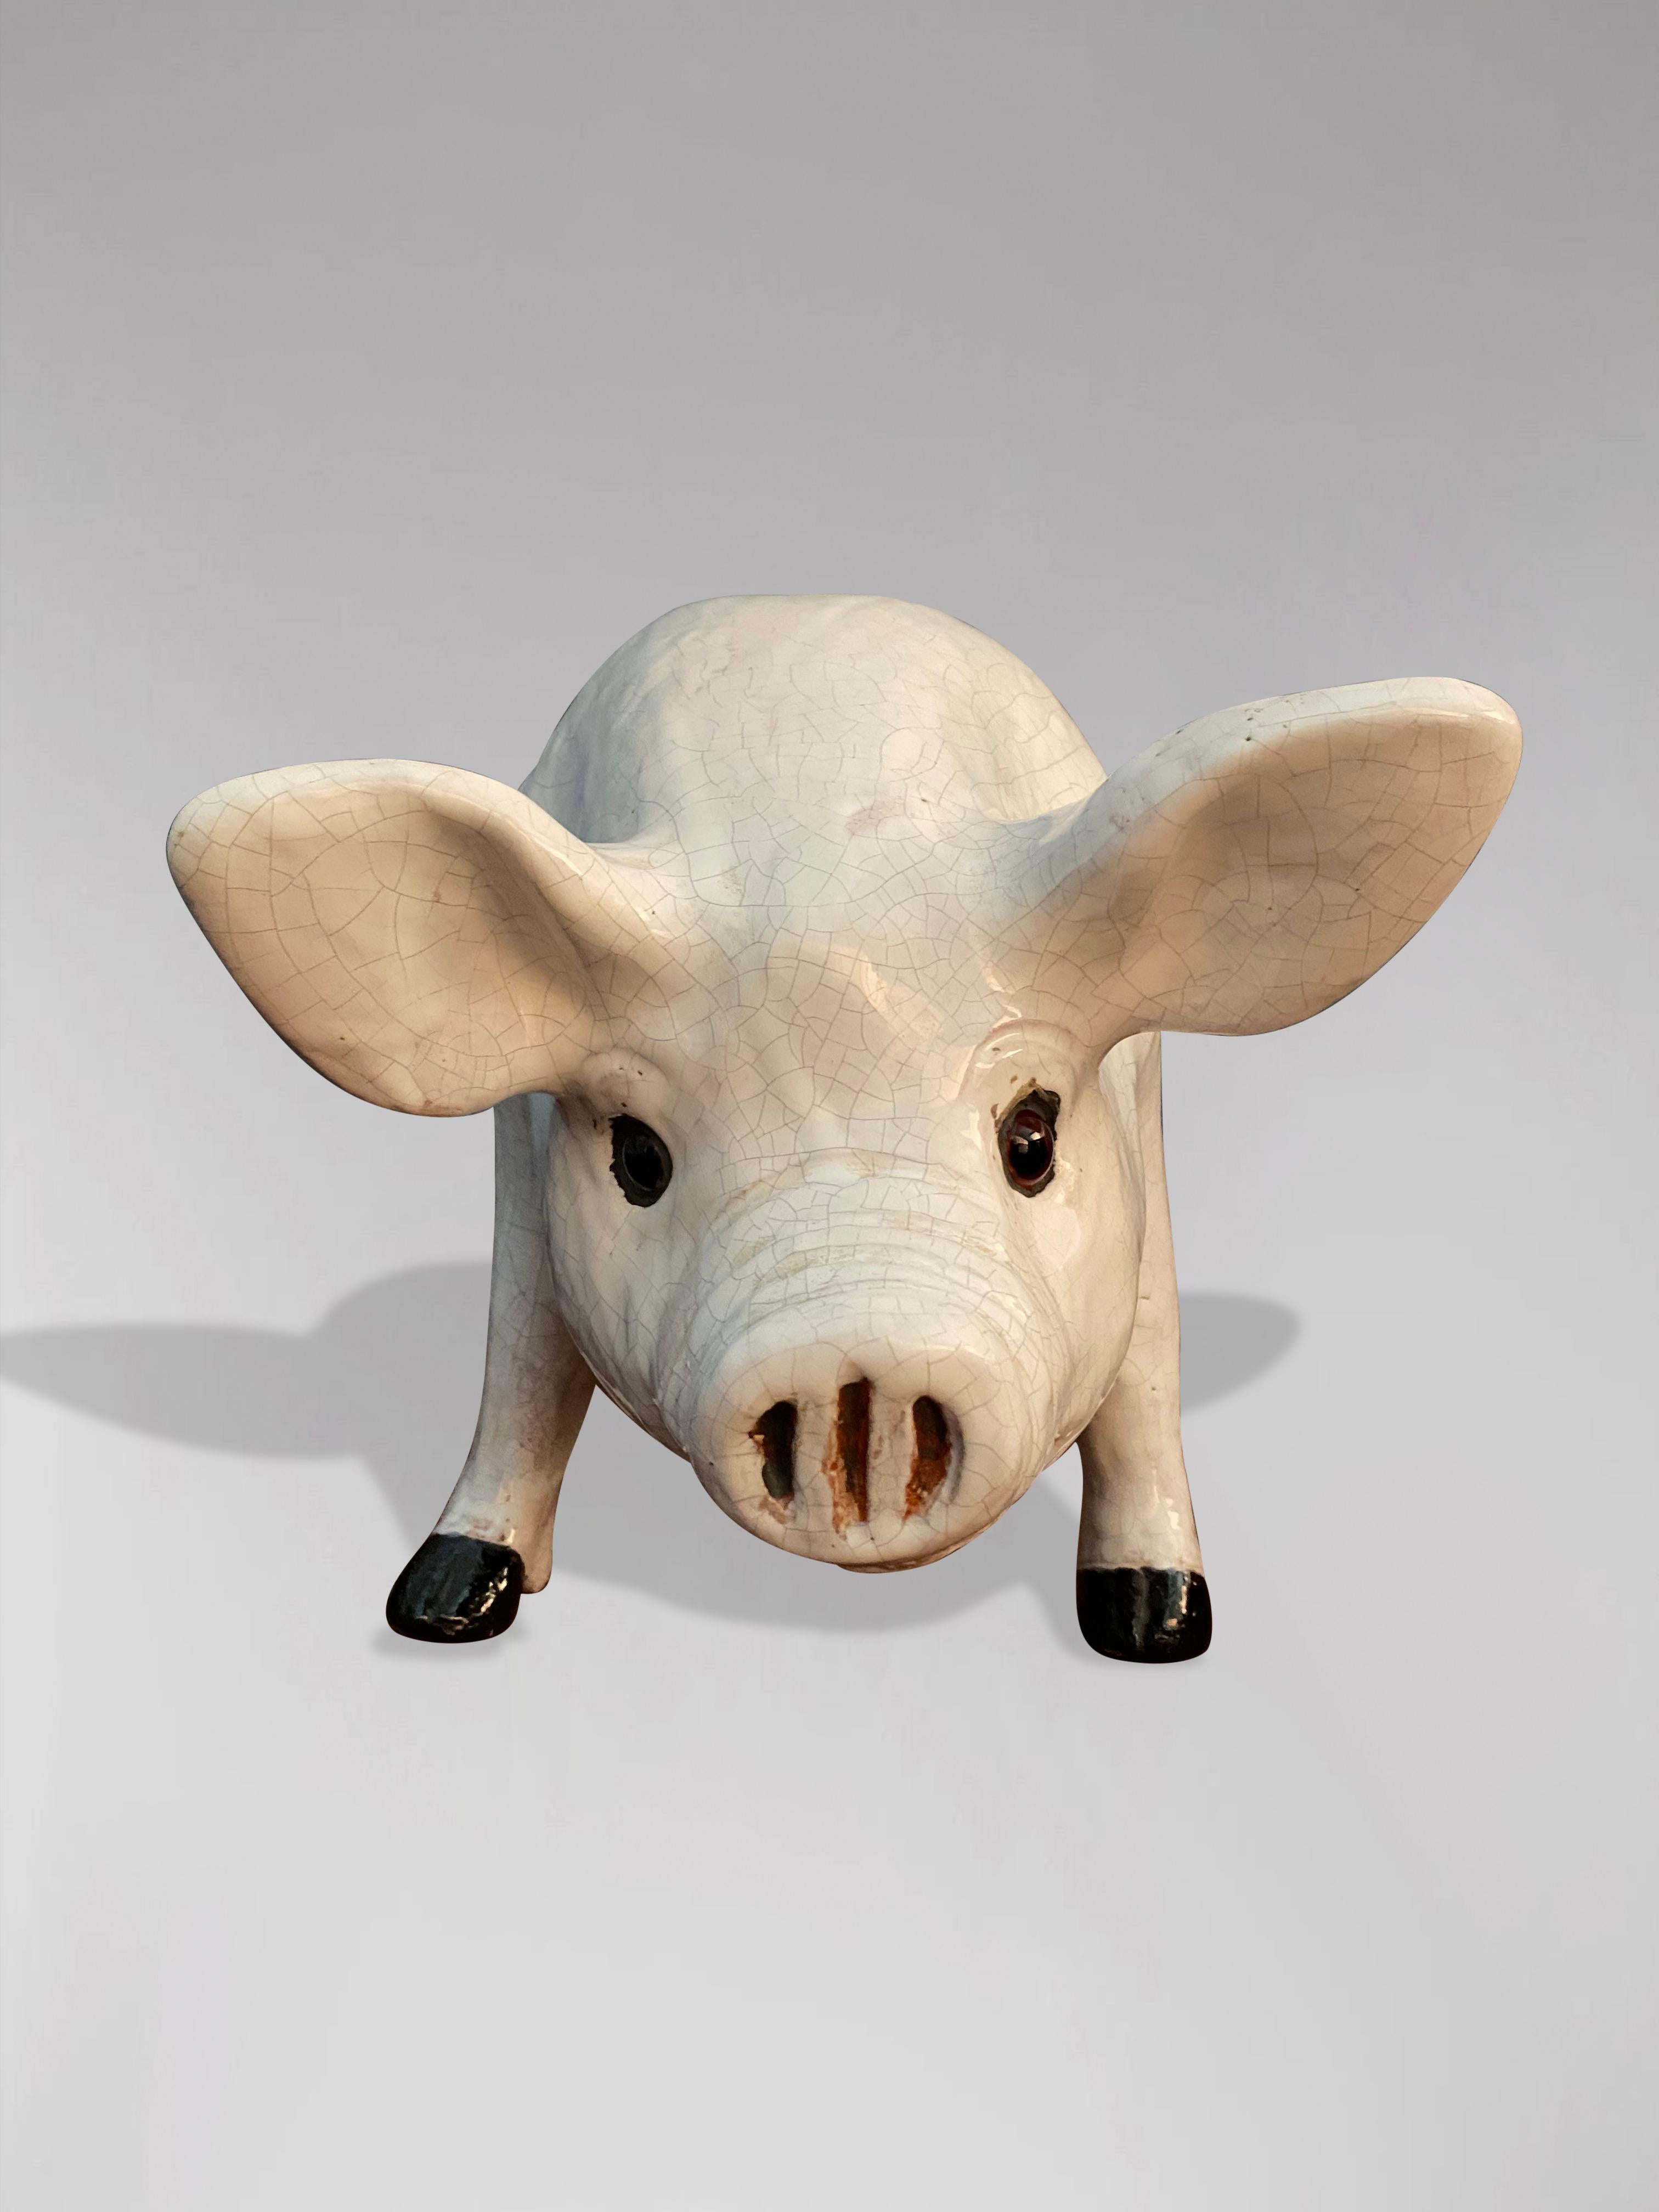 Hand-Crafted 19th Century French Earthenware Pig Sculpture from Bavent in Normandy For Sale